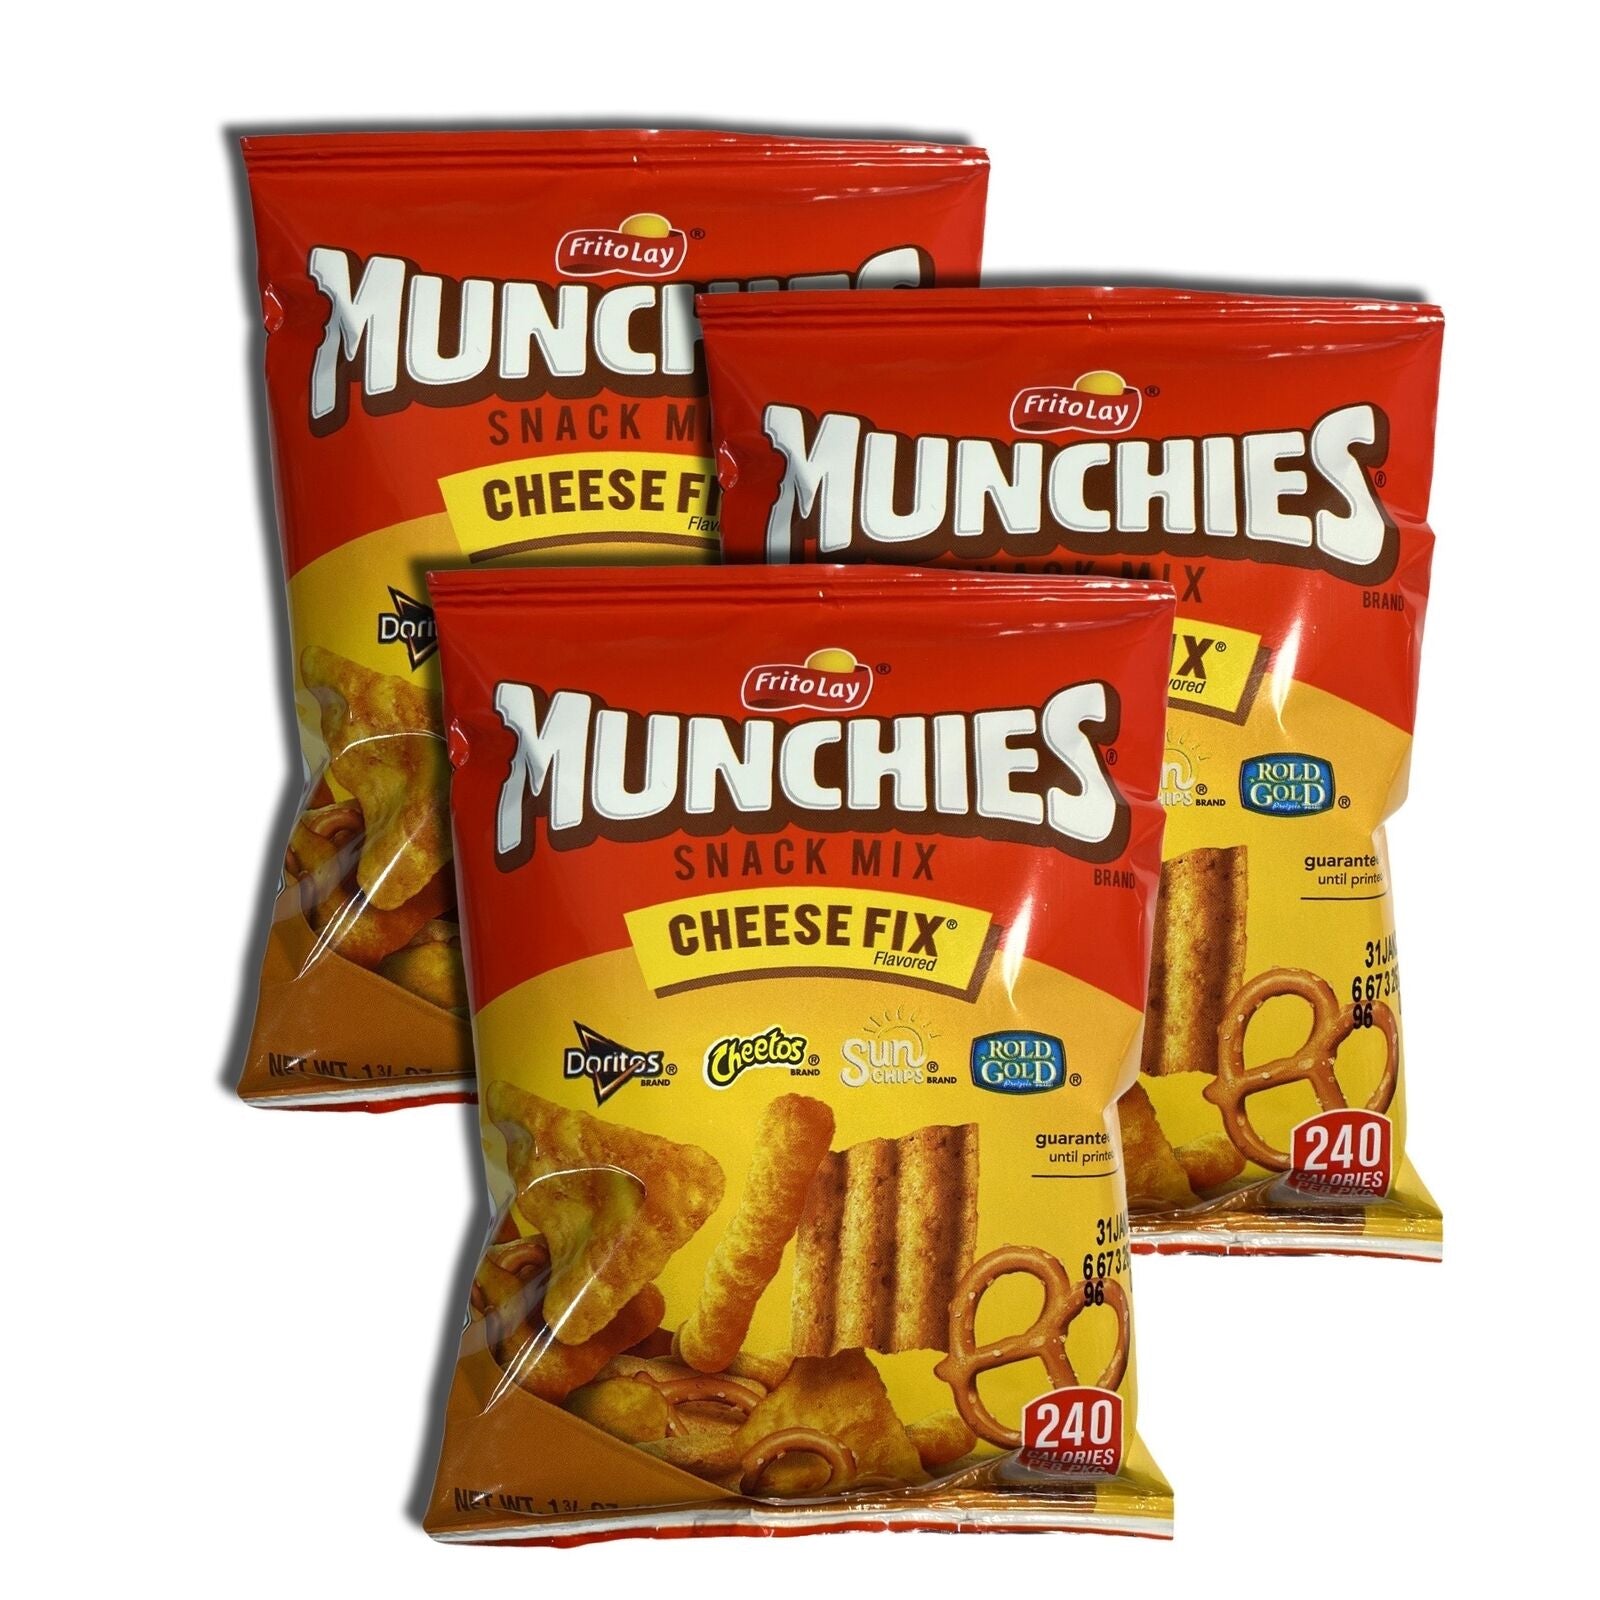 Tribeca Curations | Munchies Snack Mix Value Pack by Tribeca Curations | Cheese